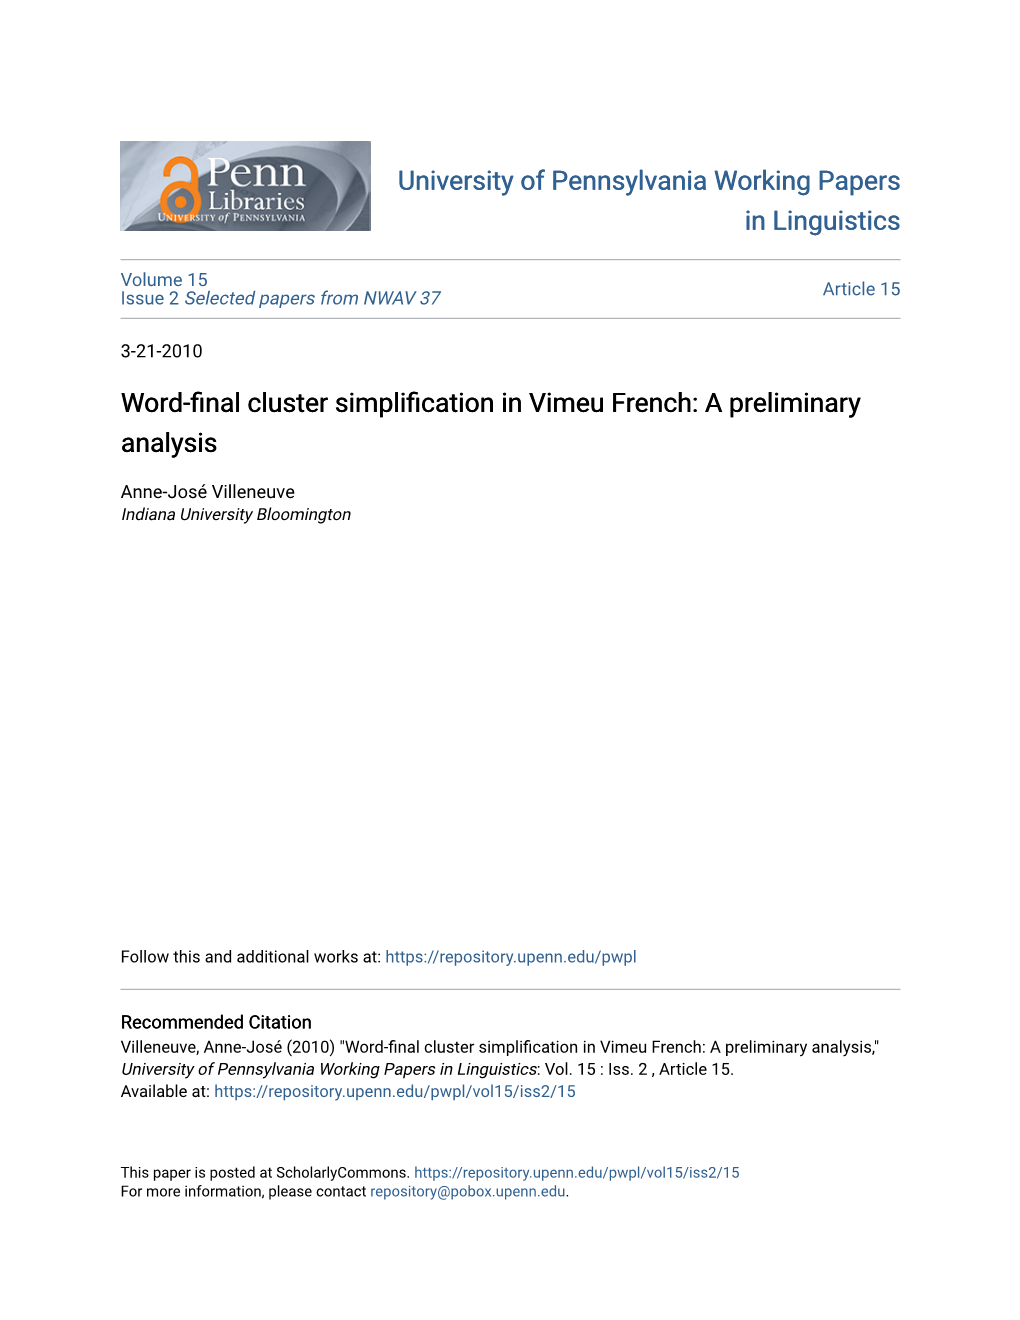 Word-Final Cluster Simplification in Vimeu French: a Preliminary Analysis